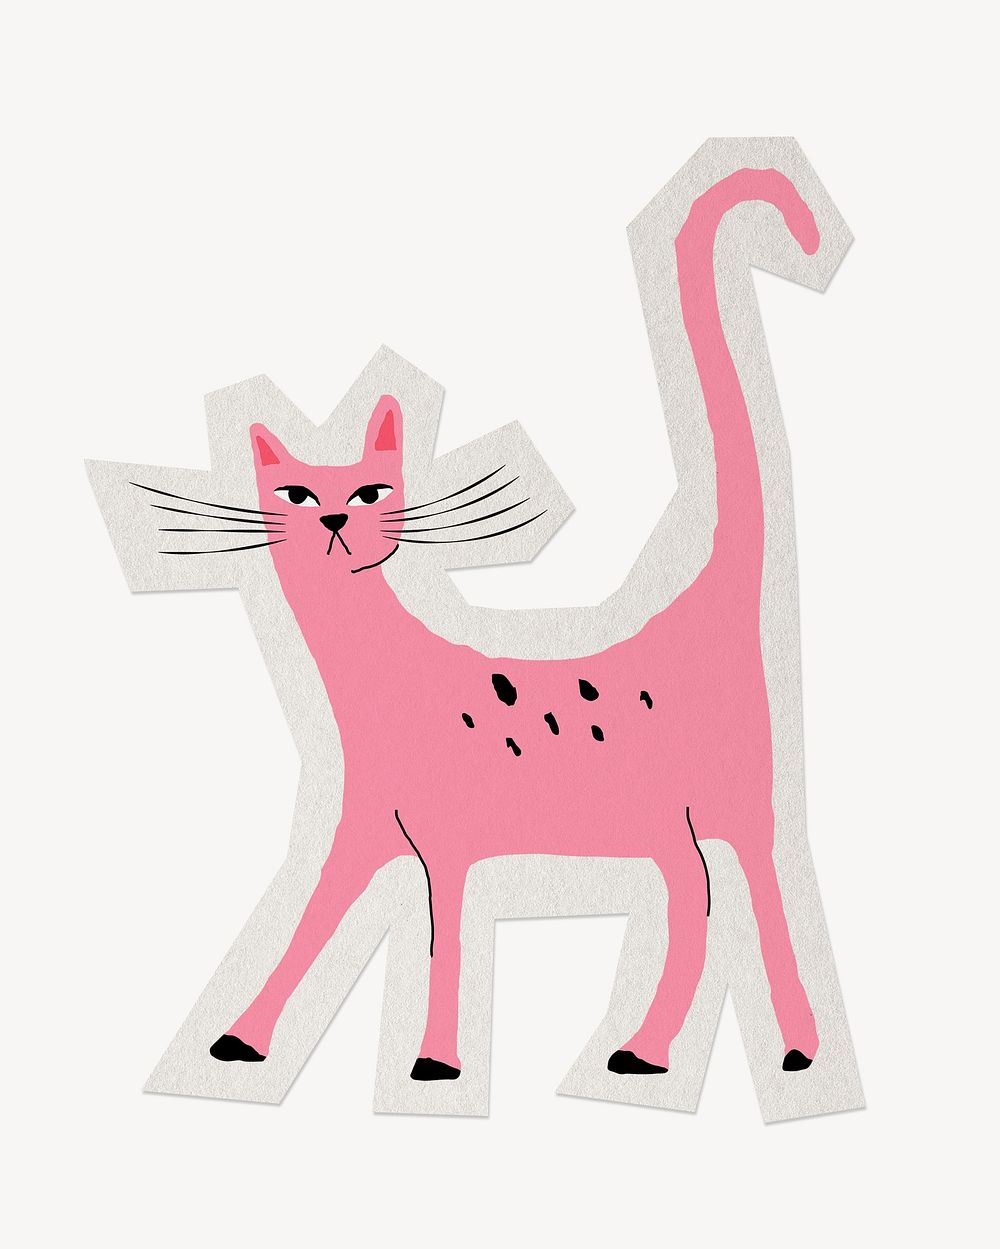 Pink cat illustration paper element with white border